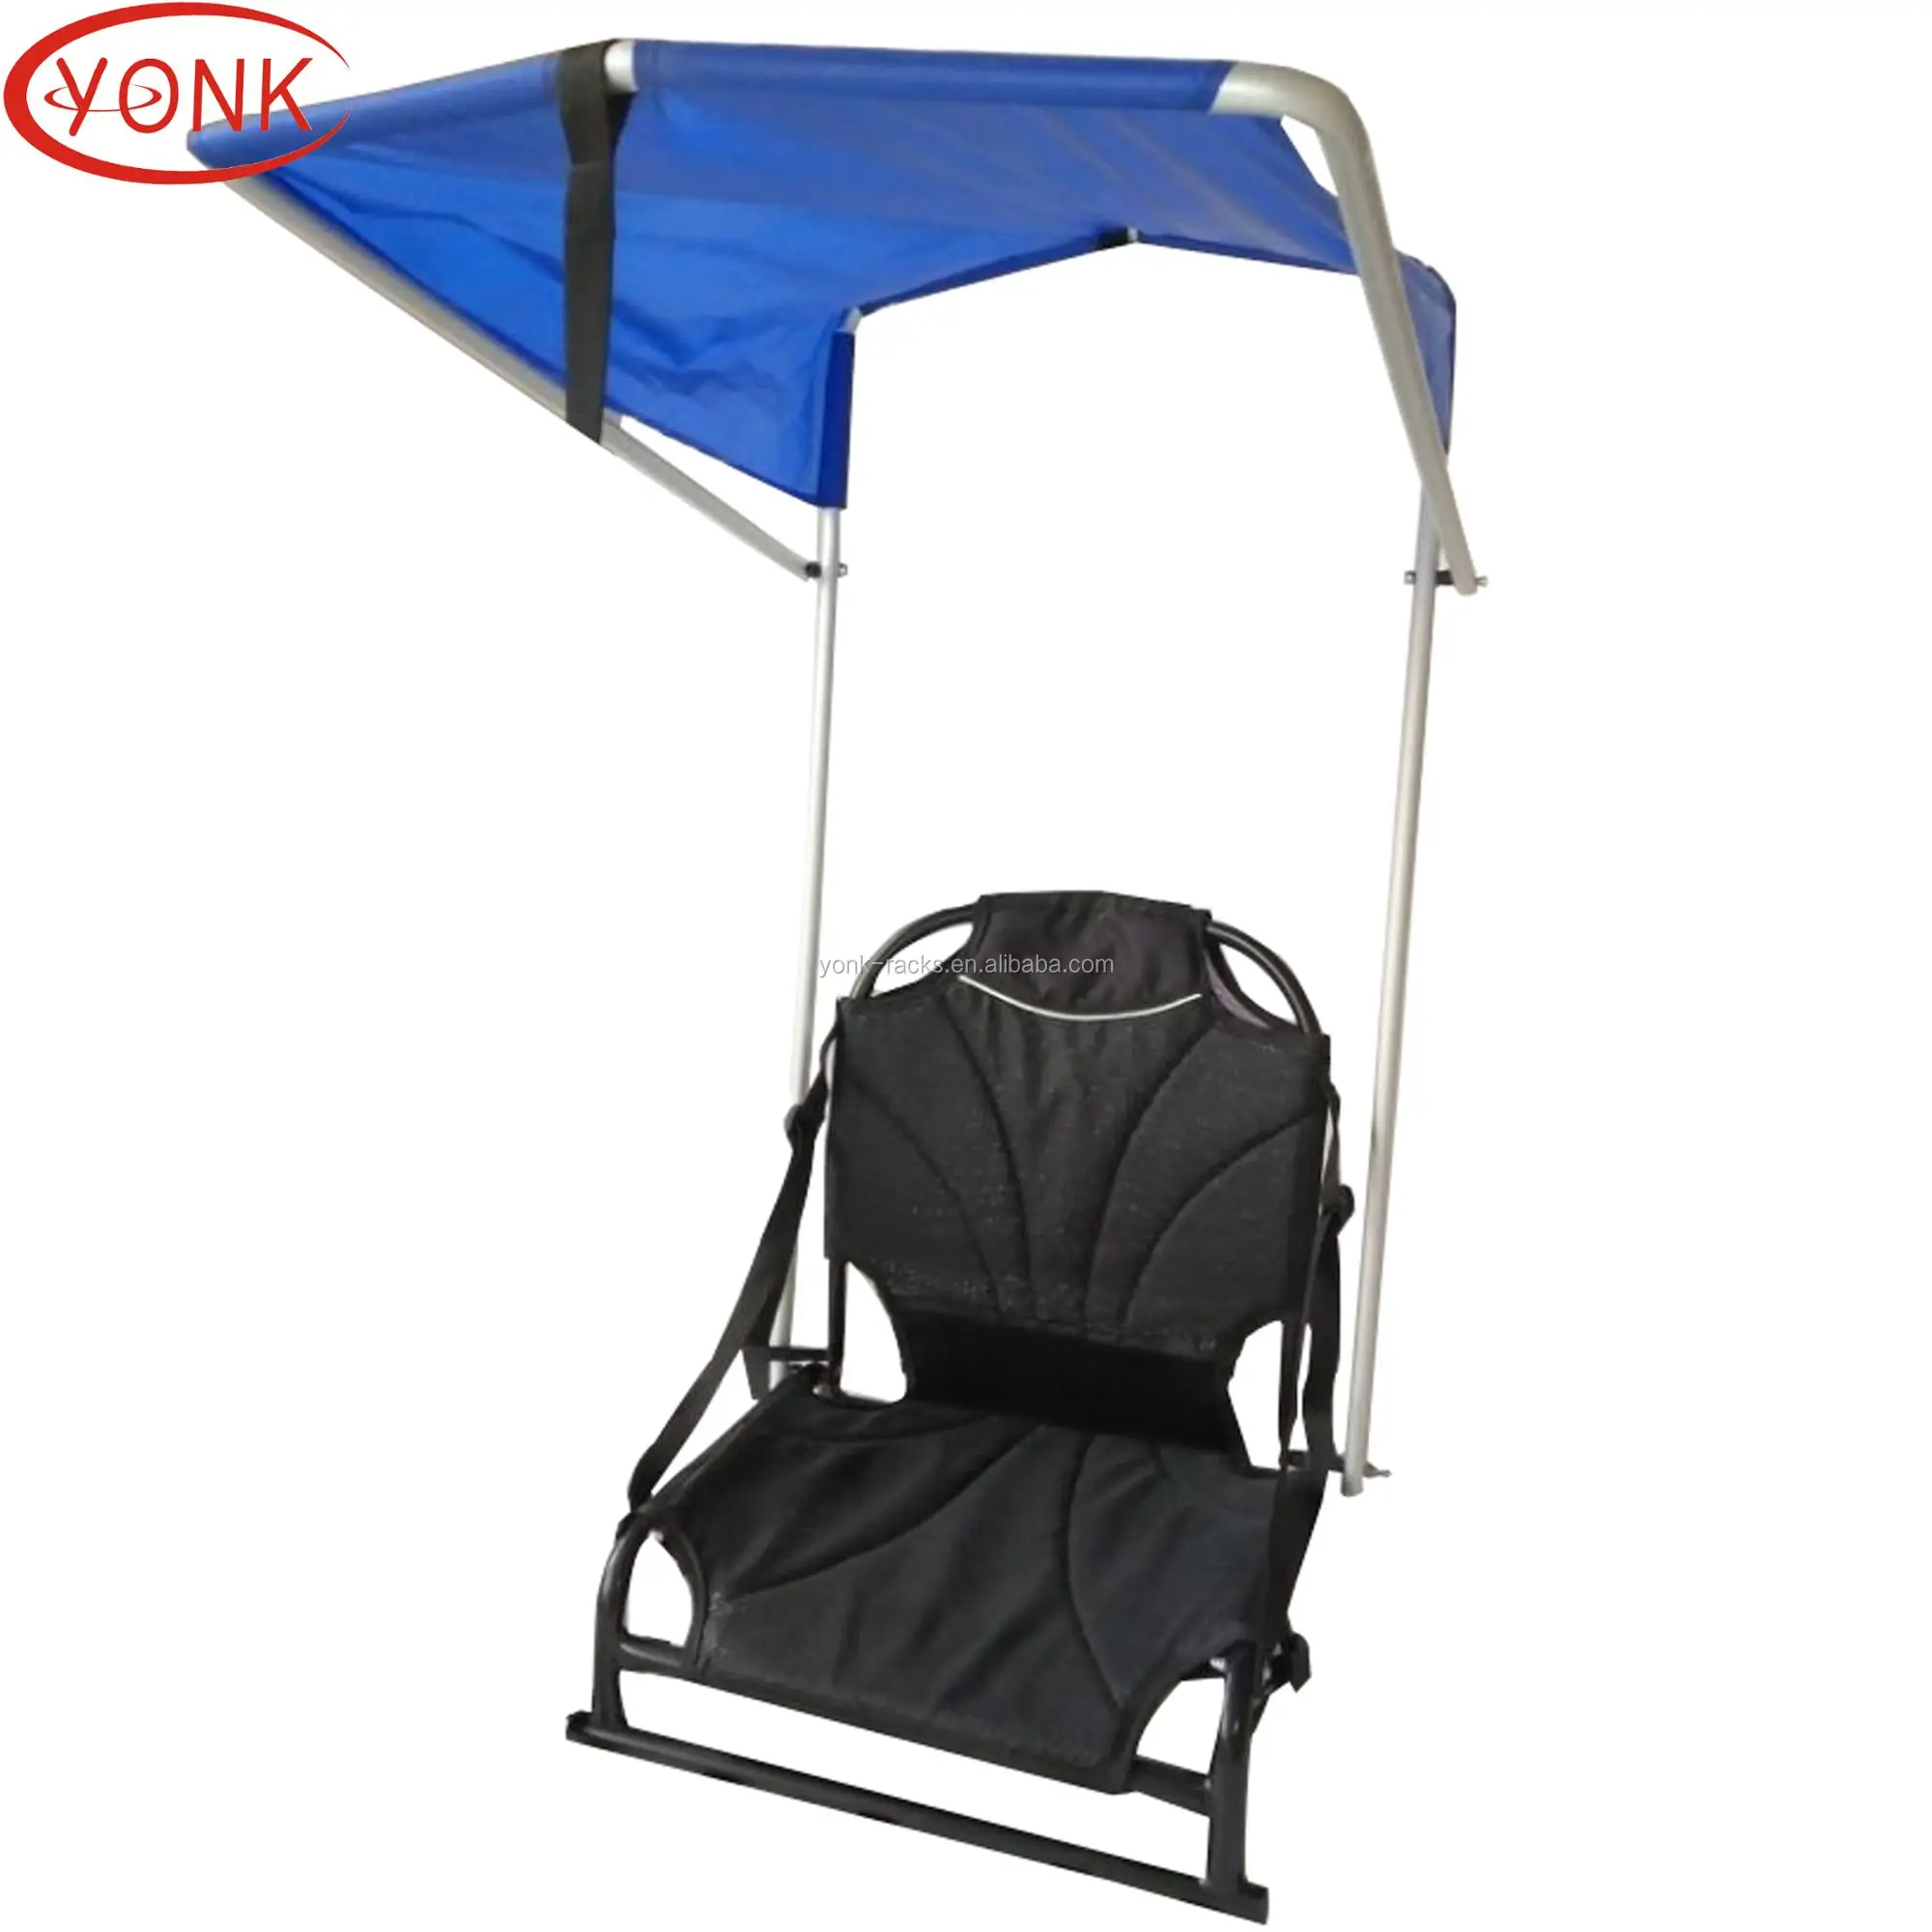 Portable Top Cover Canopy For Kayak Canoe Boat Seat Buy